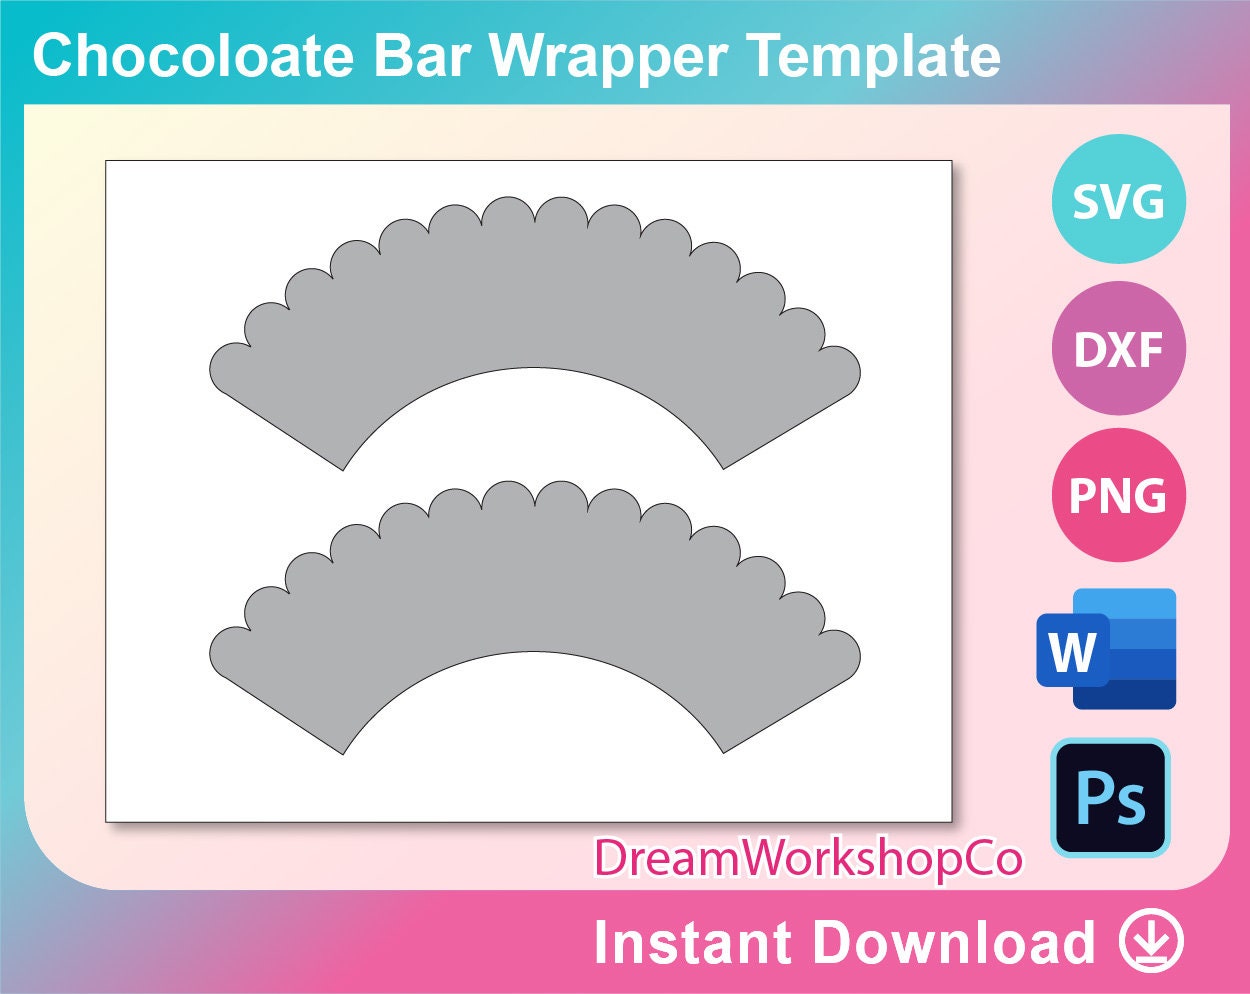 PSD and Docx PNG Cupcake Wrapper Template 8.5x11 Sheet SVG